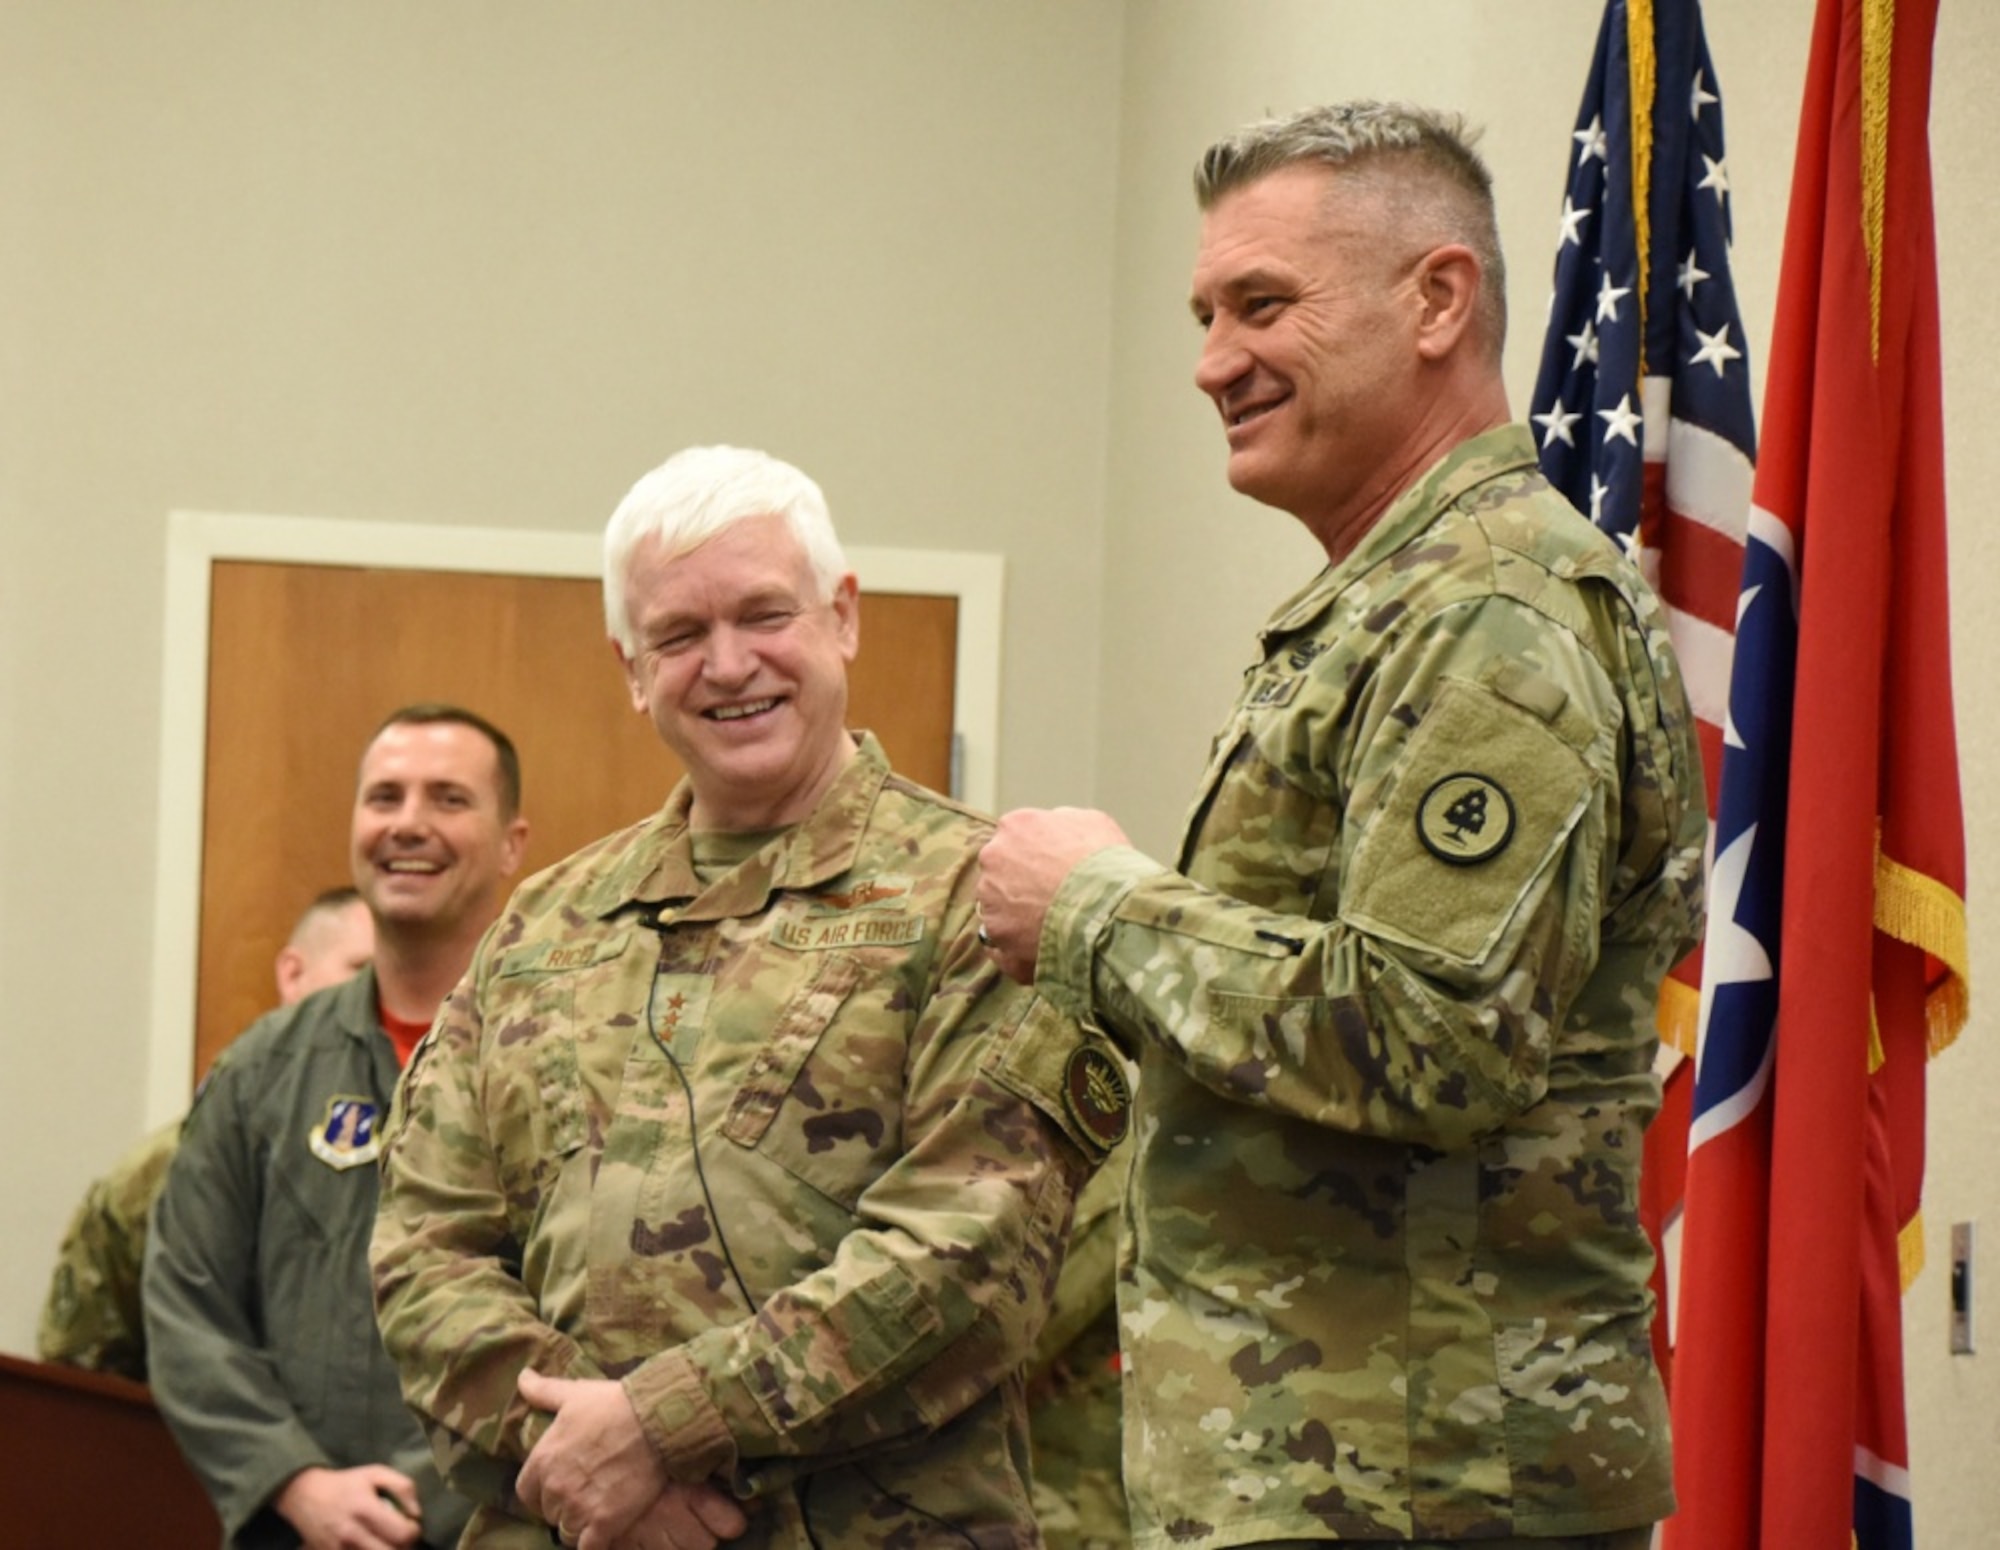 U.S. Army Maj. Gen. Jeff Holmes, right, the adjutant general of the Tennessee National Guard, laughs with U.S. Air Force Lt. Gen. L. Scott Rice, director of the Air National Guard, at an all-call at the 118th Wing, Tennessee ANG, Dec. 6, 2019 at Berry Field Air National Guard Base, Nashville, Tenn. Rice’s trip to the 118th WG was his final stop in his visits to all 90 wings in the ANG during his tenure as director. (U.S. Air National Guard photo by Tech. Sgt. Mark Thompson)